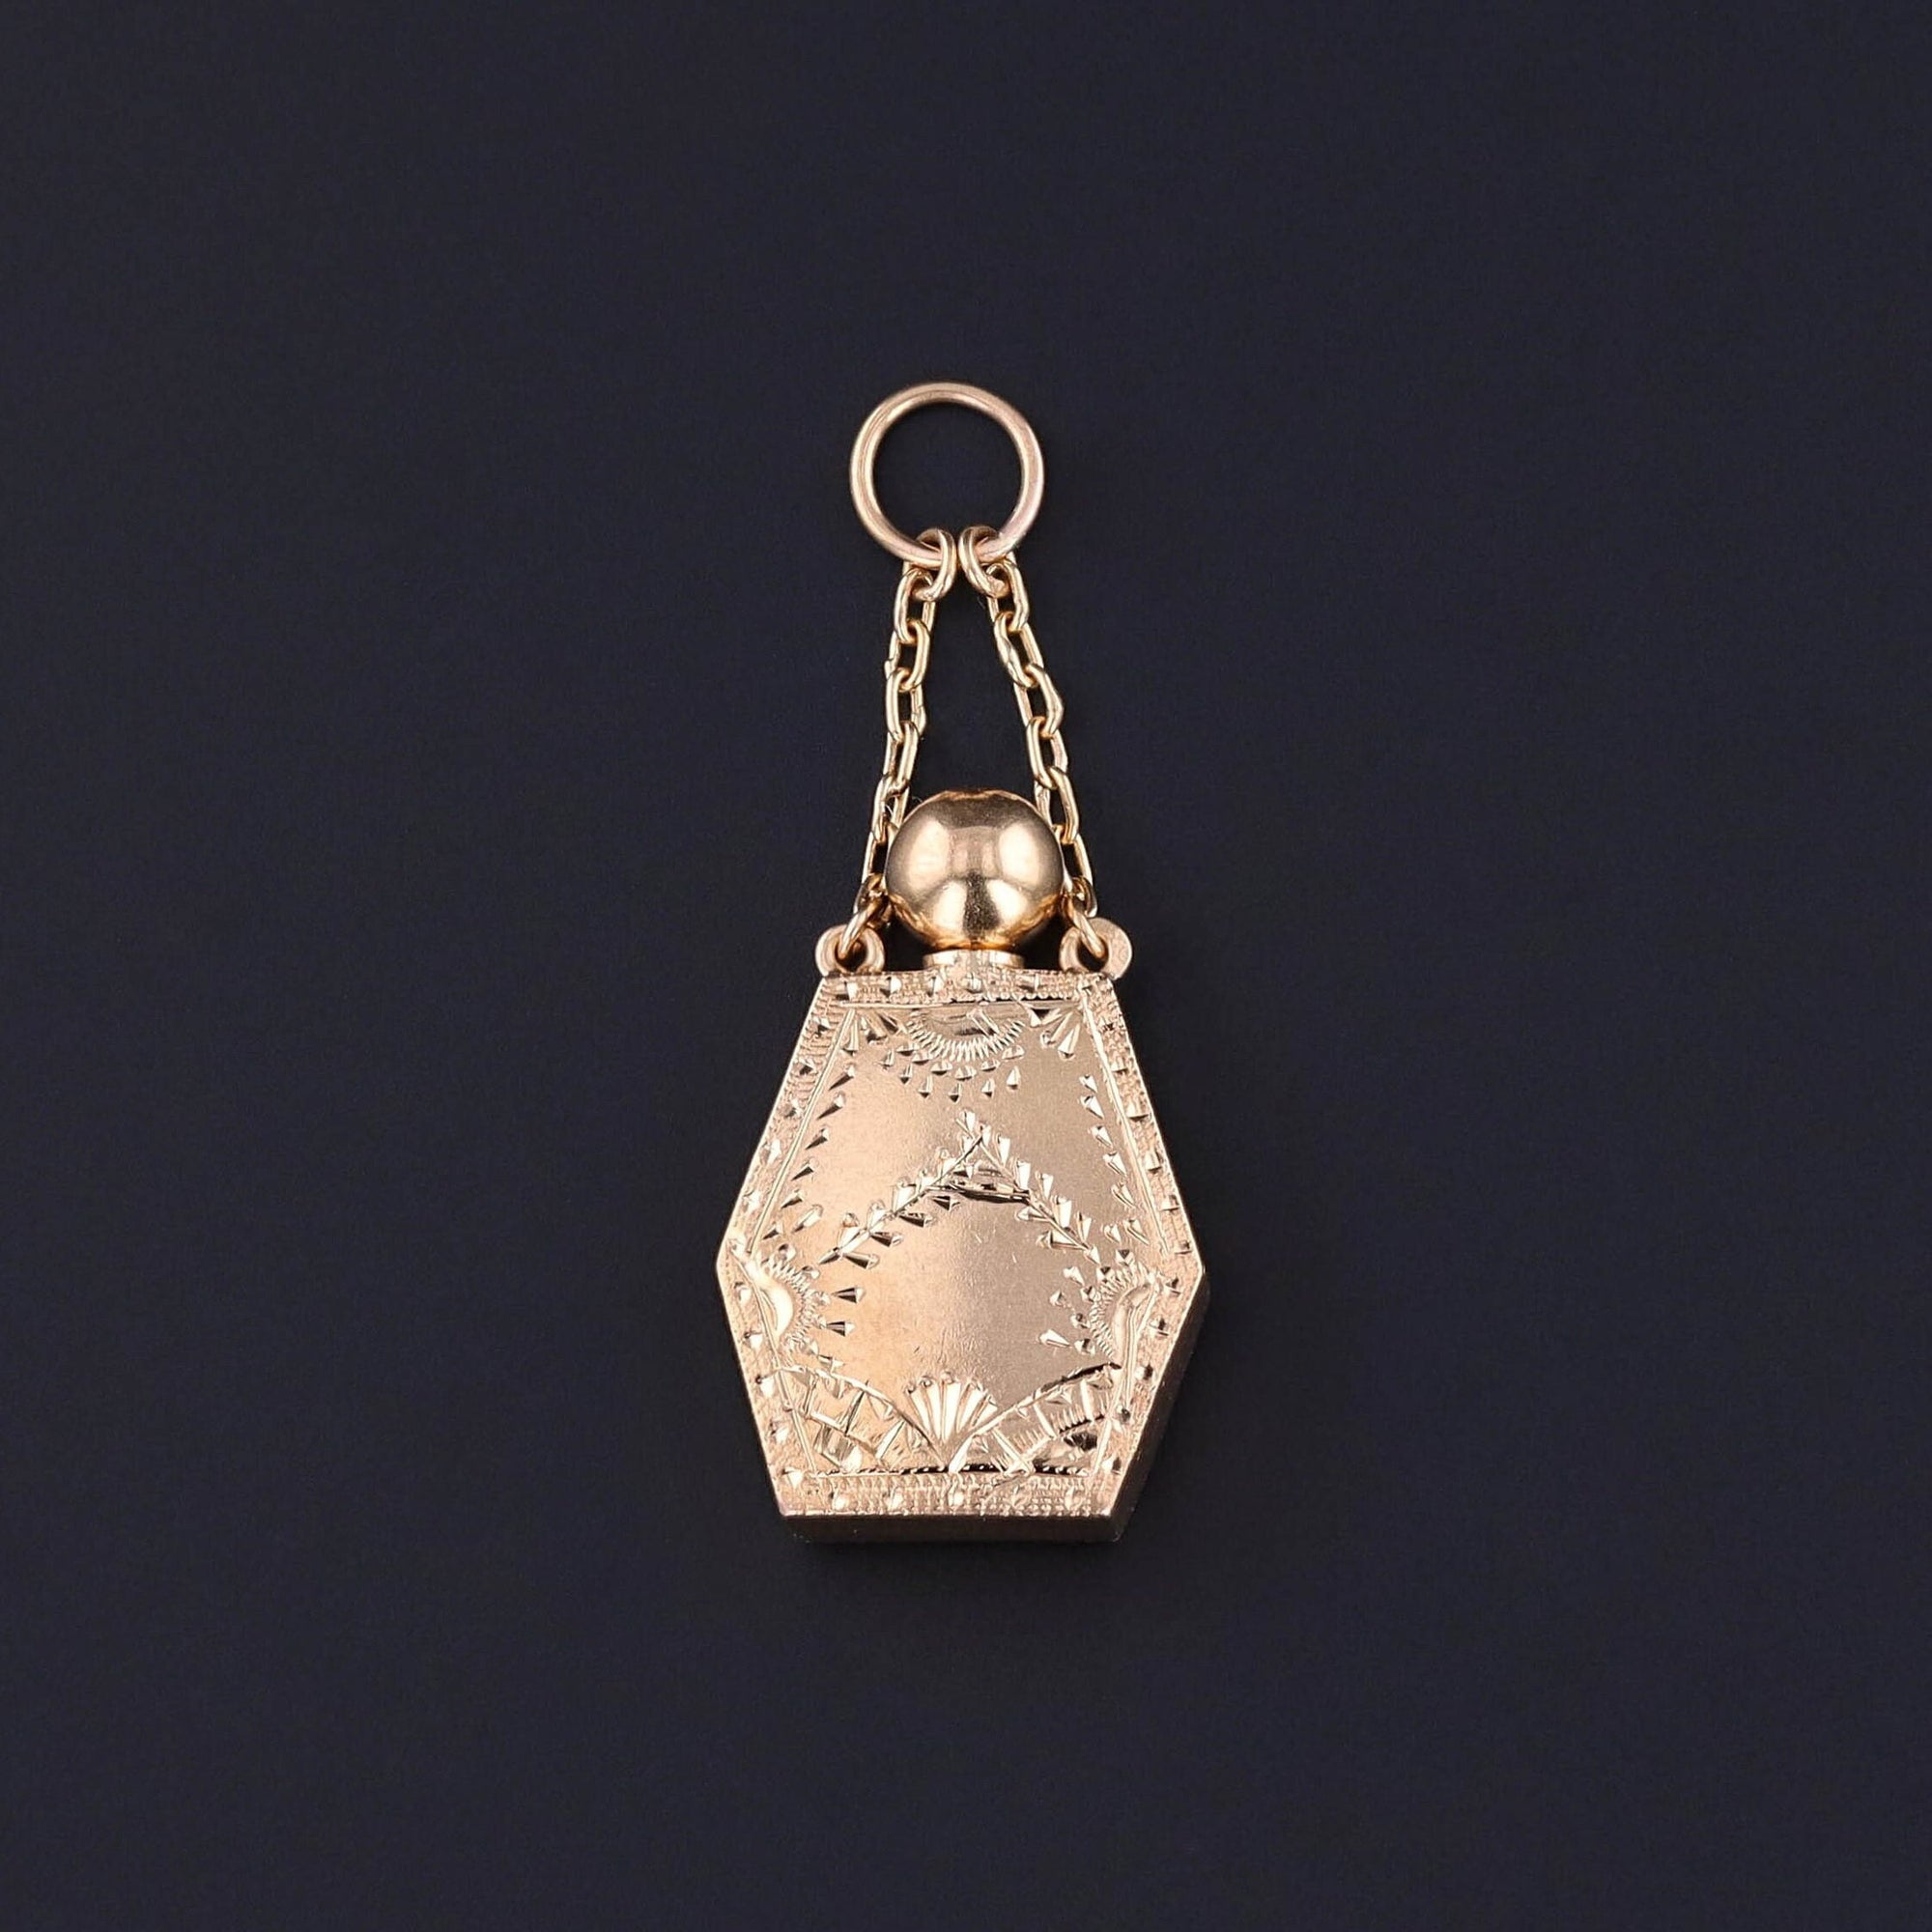 An Antique Perfume Charm: This antique charm (circa 1900-1910) features a hand etched perfume bottle of 18k gold. It has a stopper that comes out so you canadd your favorite scent to the bottle.